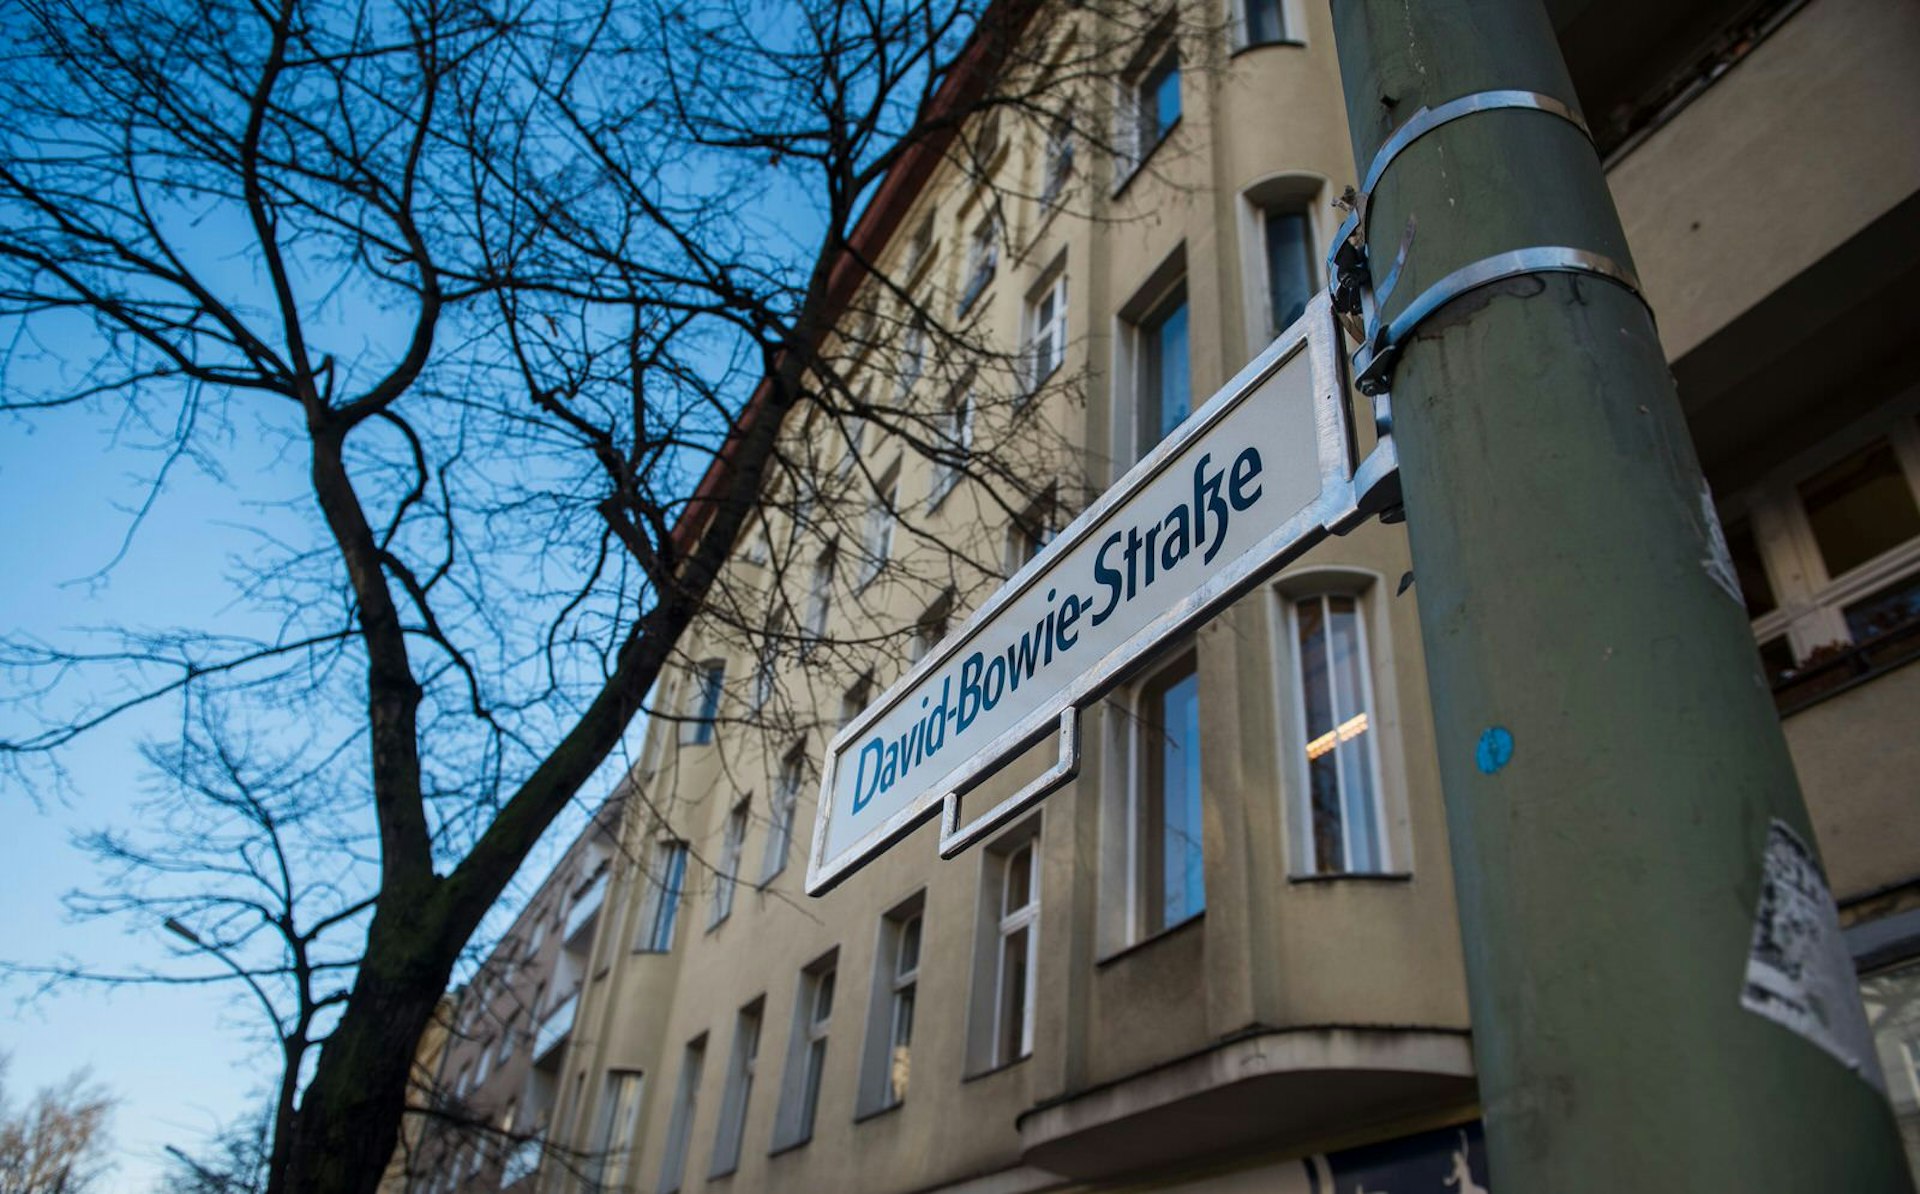 A street sign reading David Bowie Strasse is pictured in Berlin's Hauptstrasse as a tribute to British rock icon David Bowie outside his former home in Hauptstrasse 155 in Berlin 